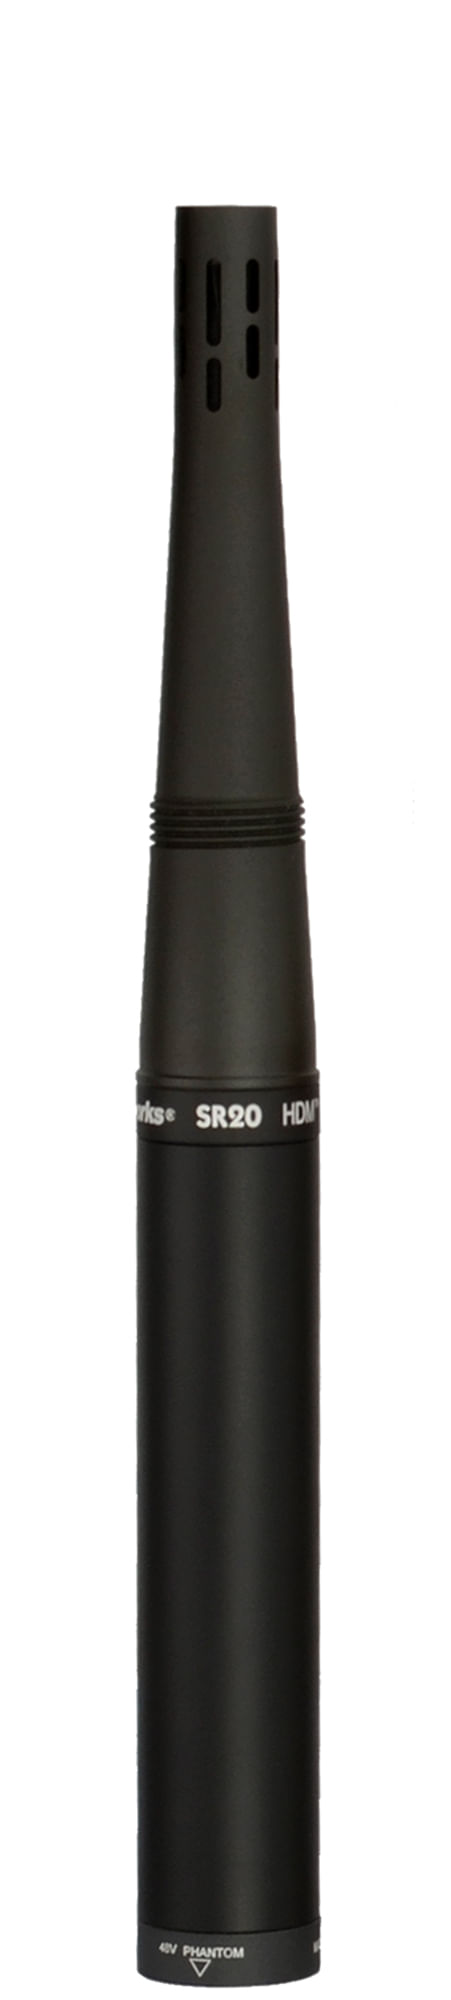 Earthworks SR20 Cardioid Condenser Microphone - Cosmo Music